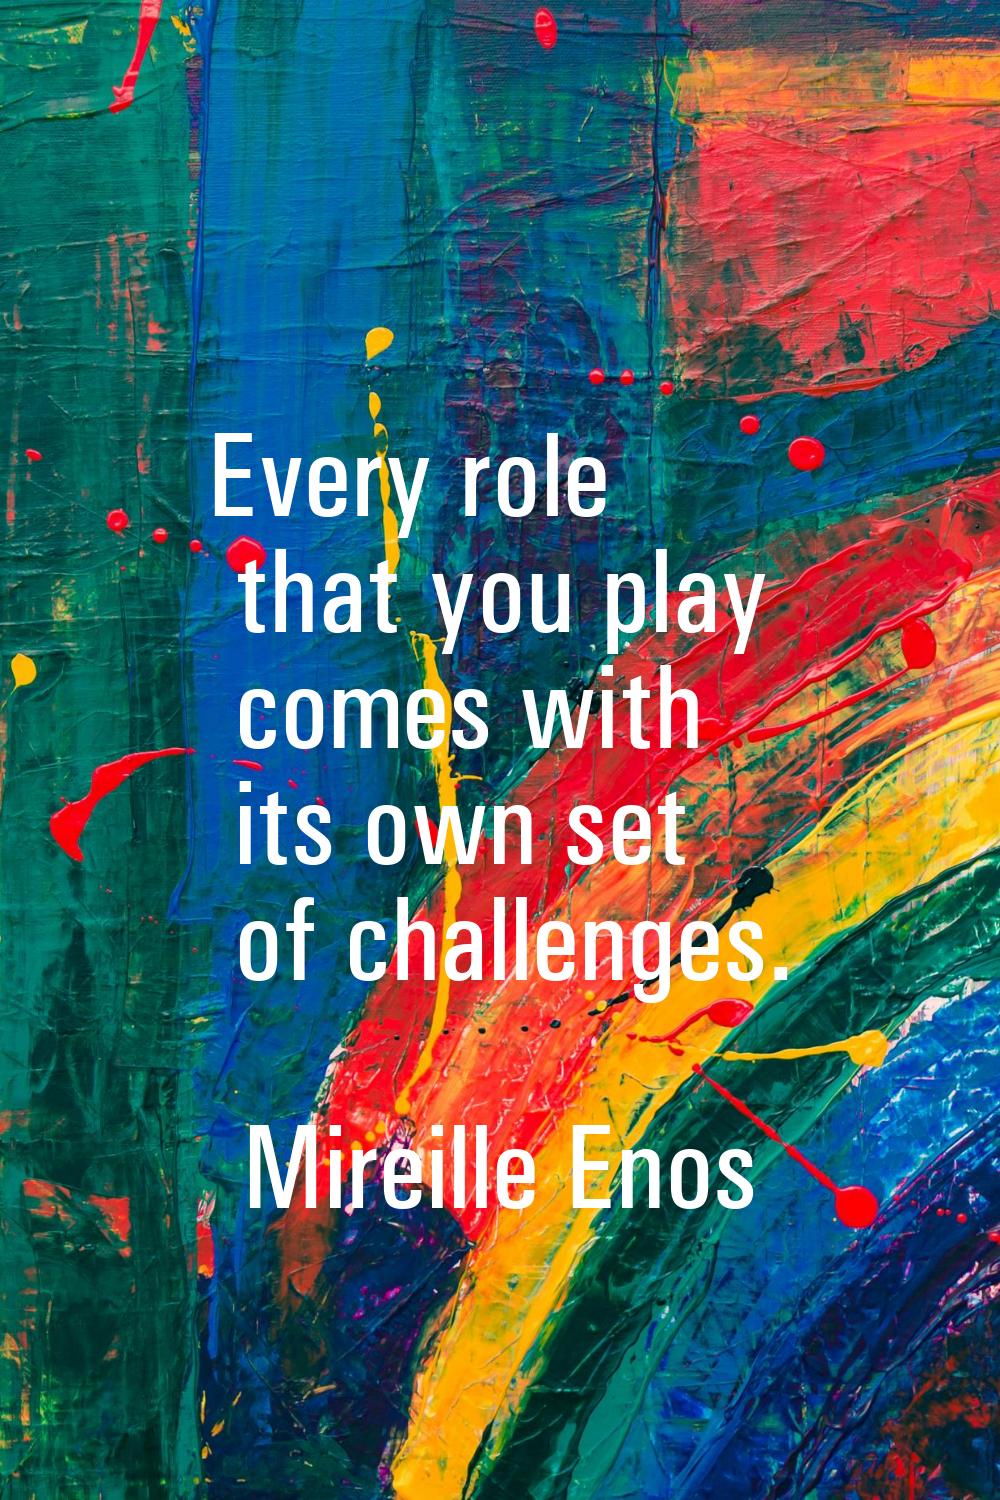 Every role that you play comes with its own set of challenges.